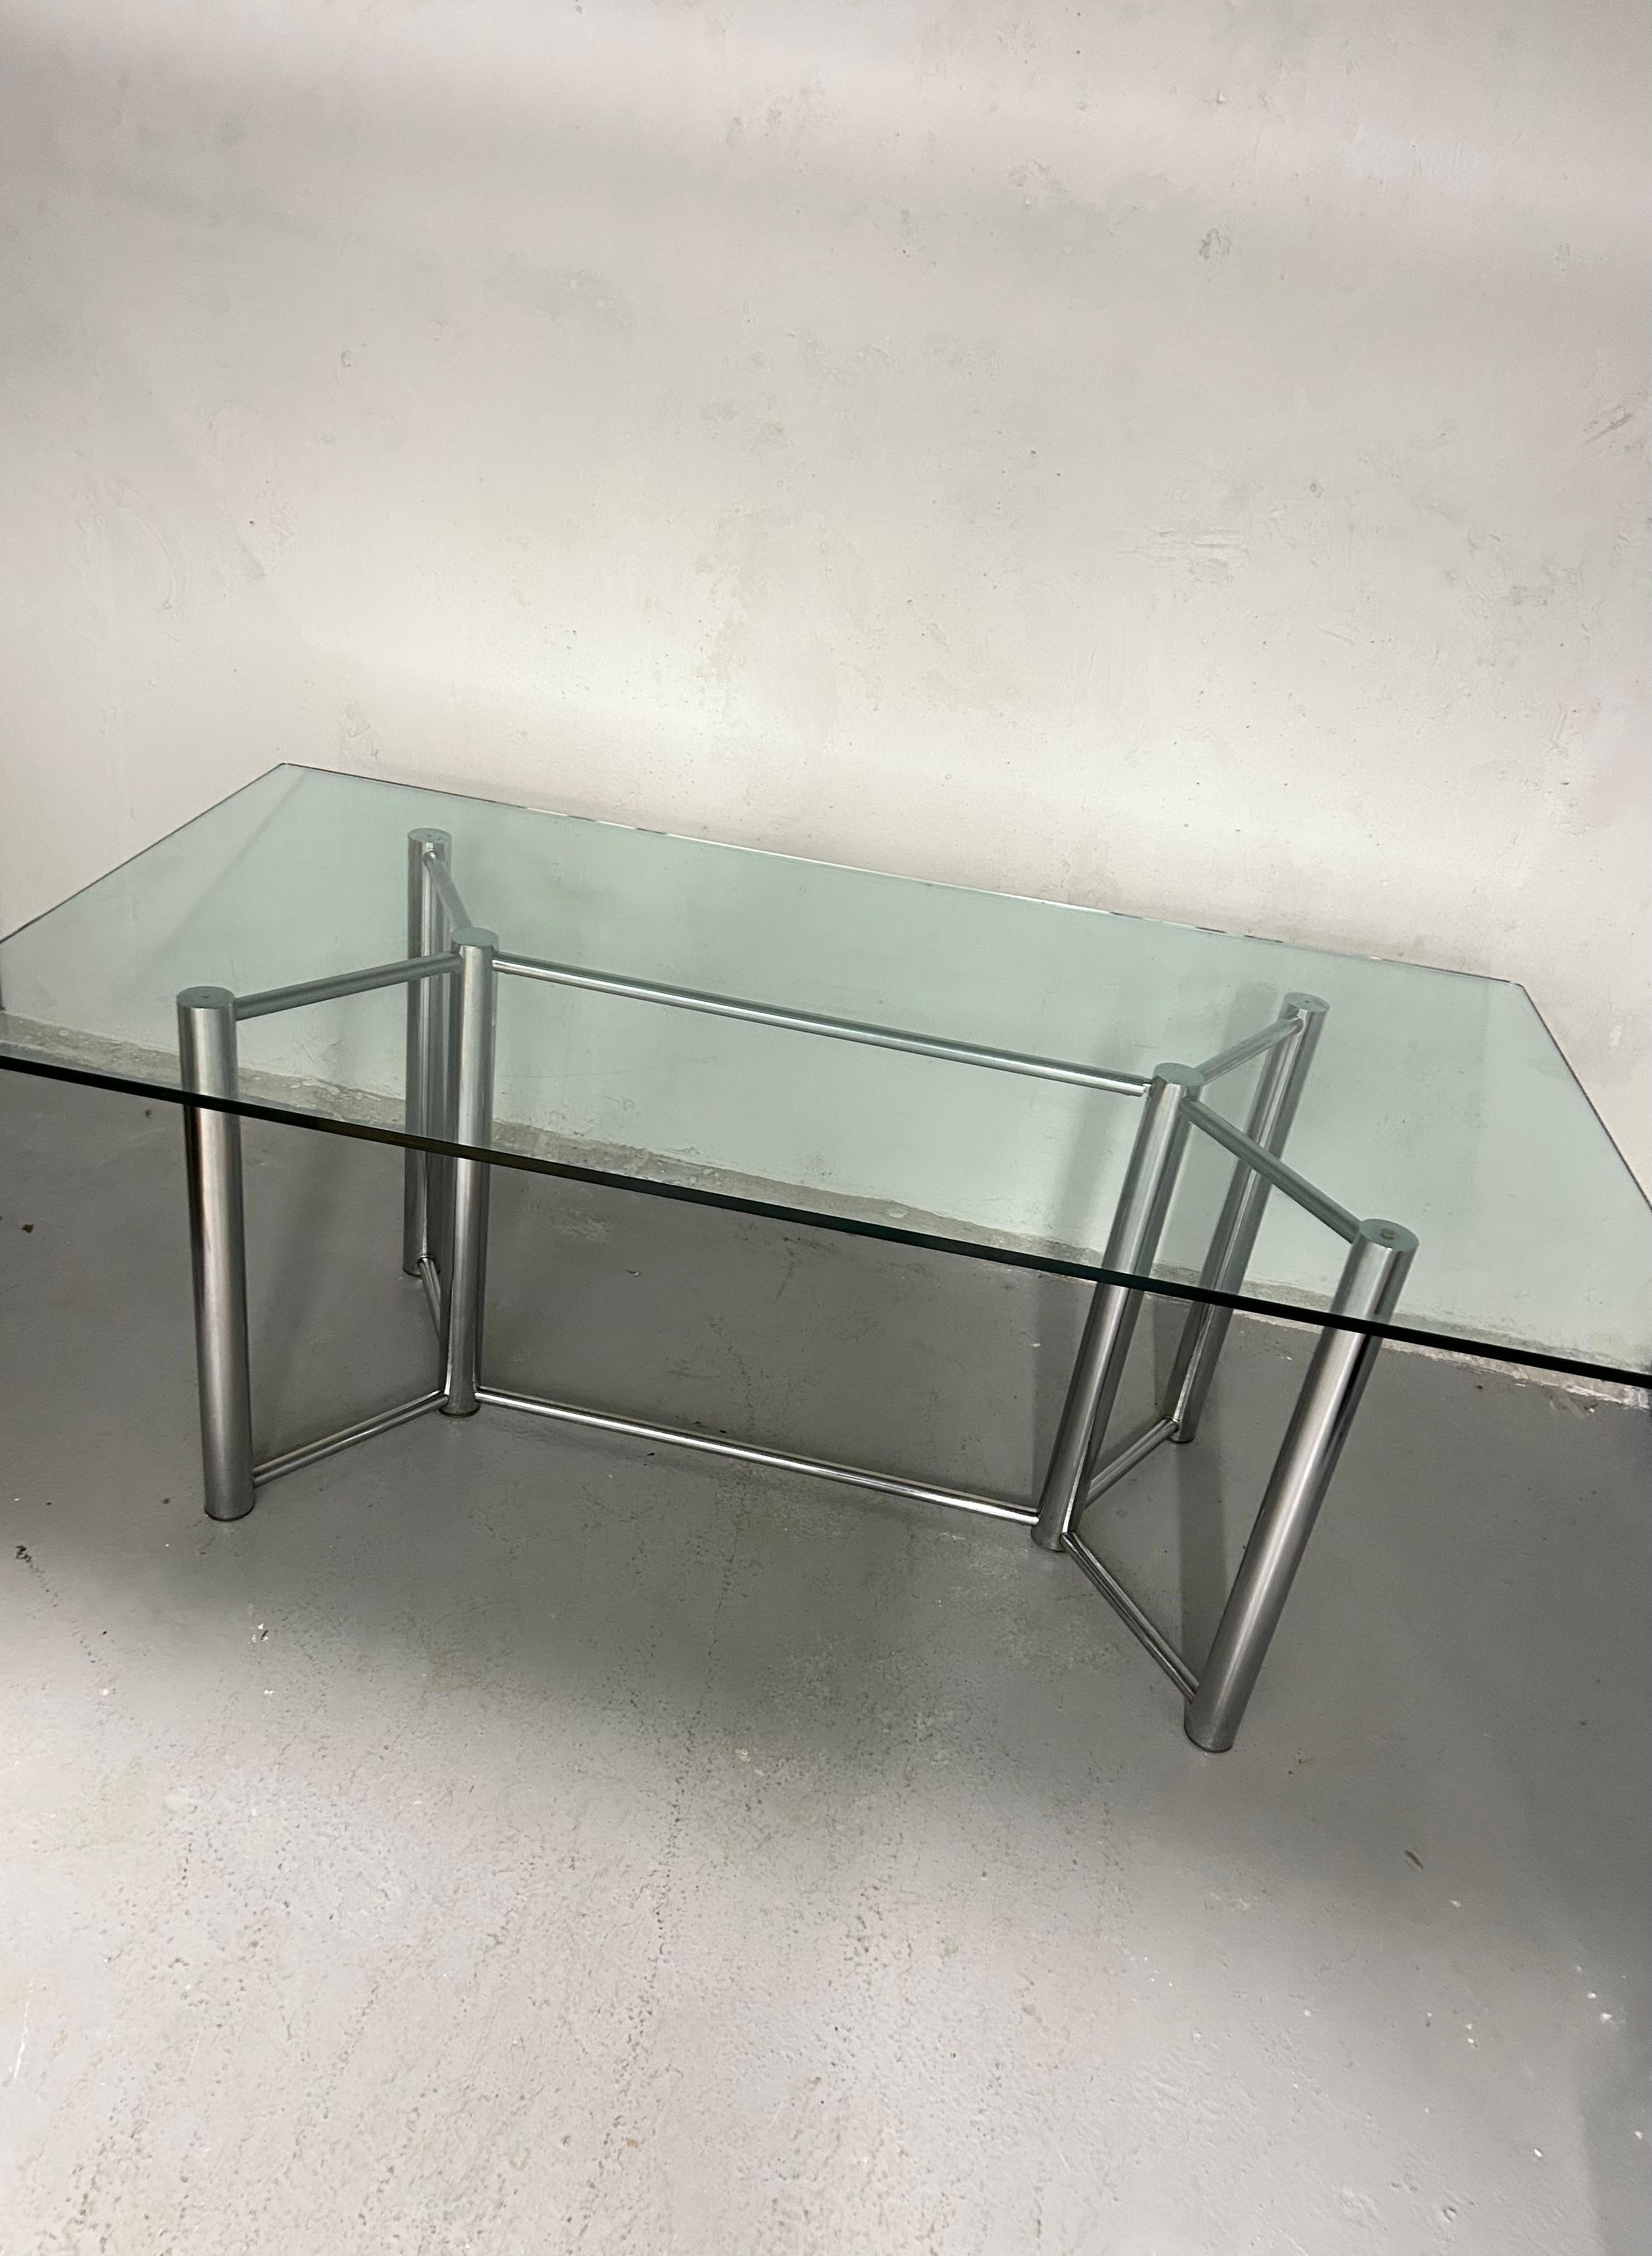 Vintage glass and chrome dining table. Thick 1/2” glass top sits on chrome cylinder leg base. Minimal wear. No rust to chrome, no chips to glass. Glass has normal surface wear for age - light scratches.